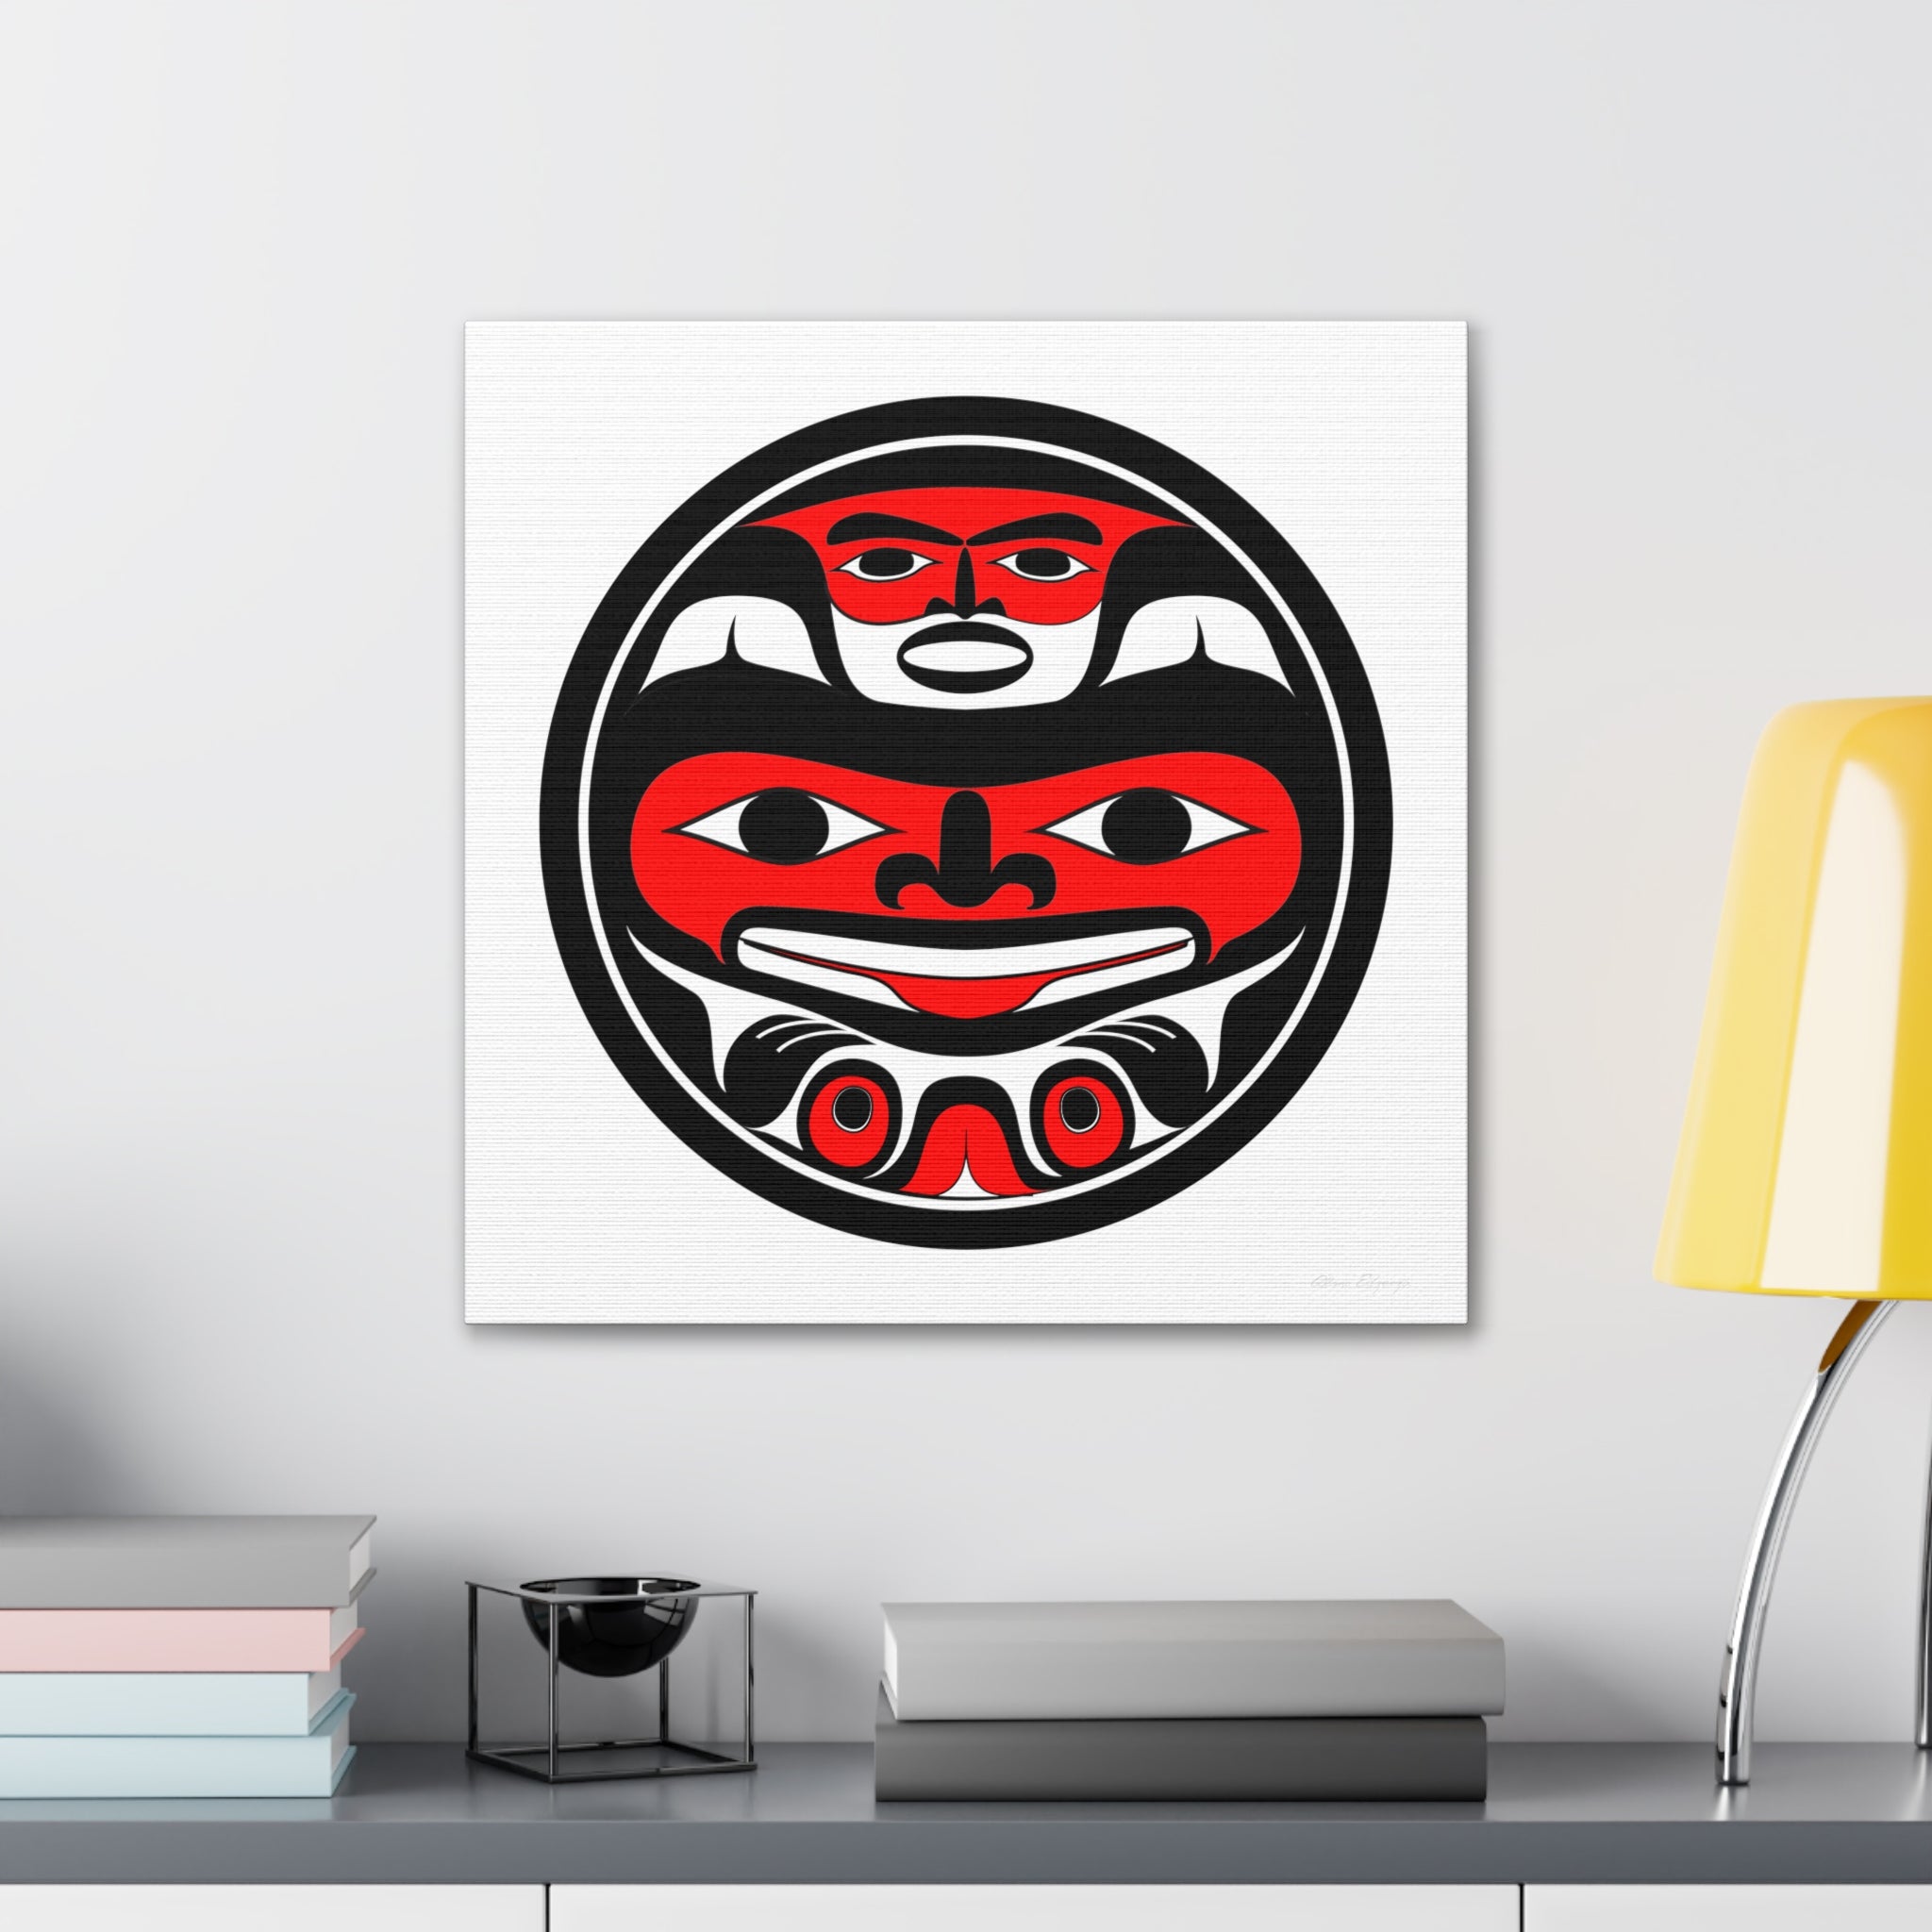 Round Red and Black on White Bear Canvas Gallery Wraps